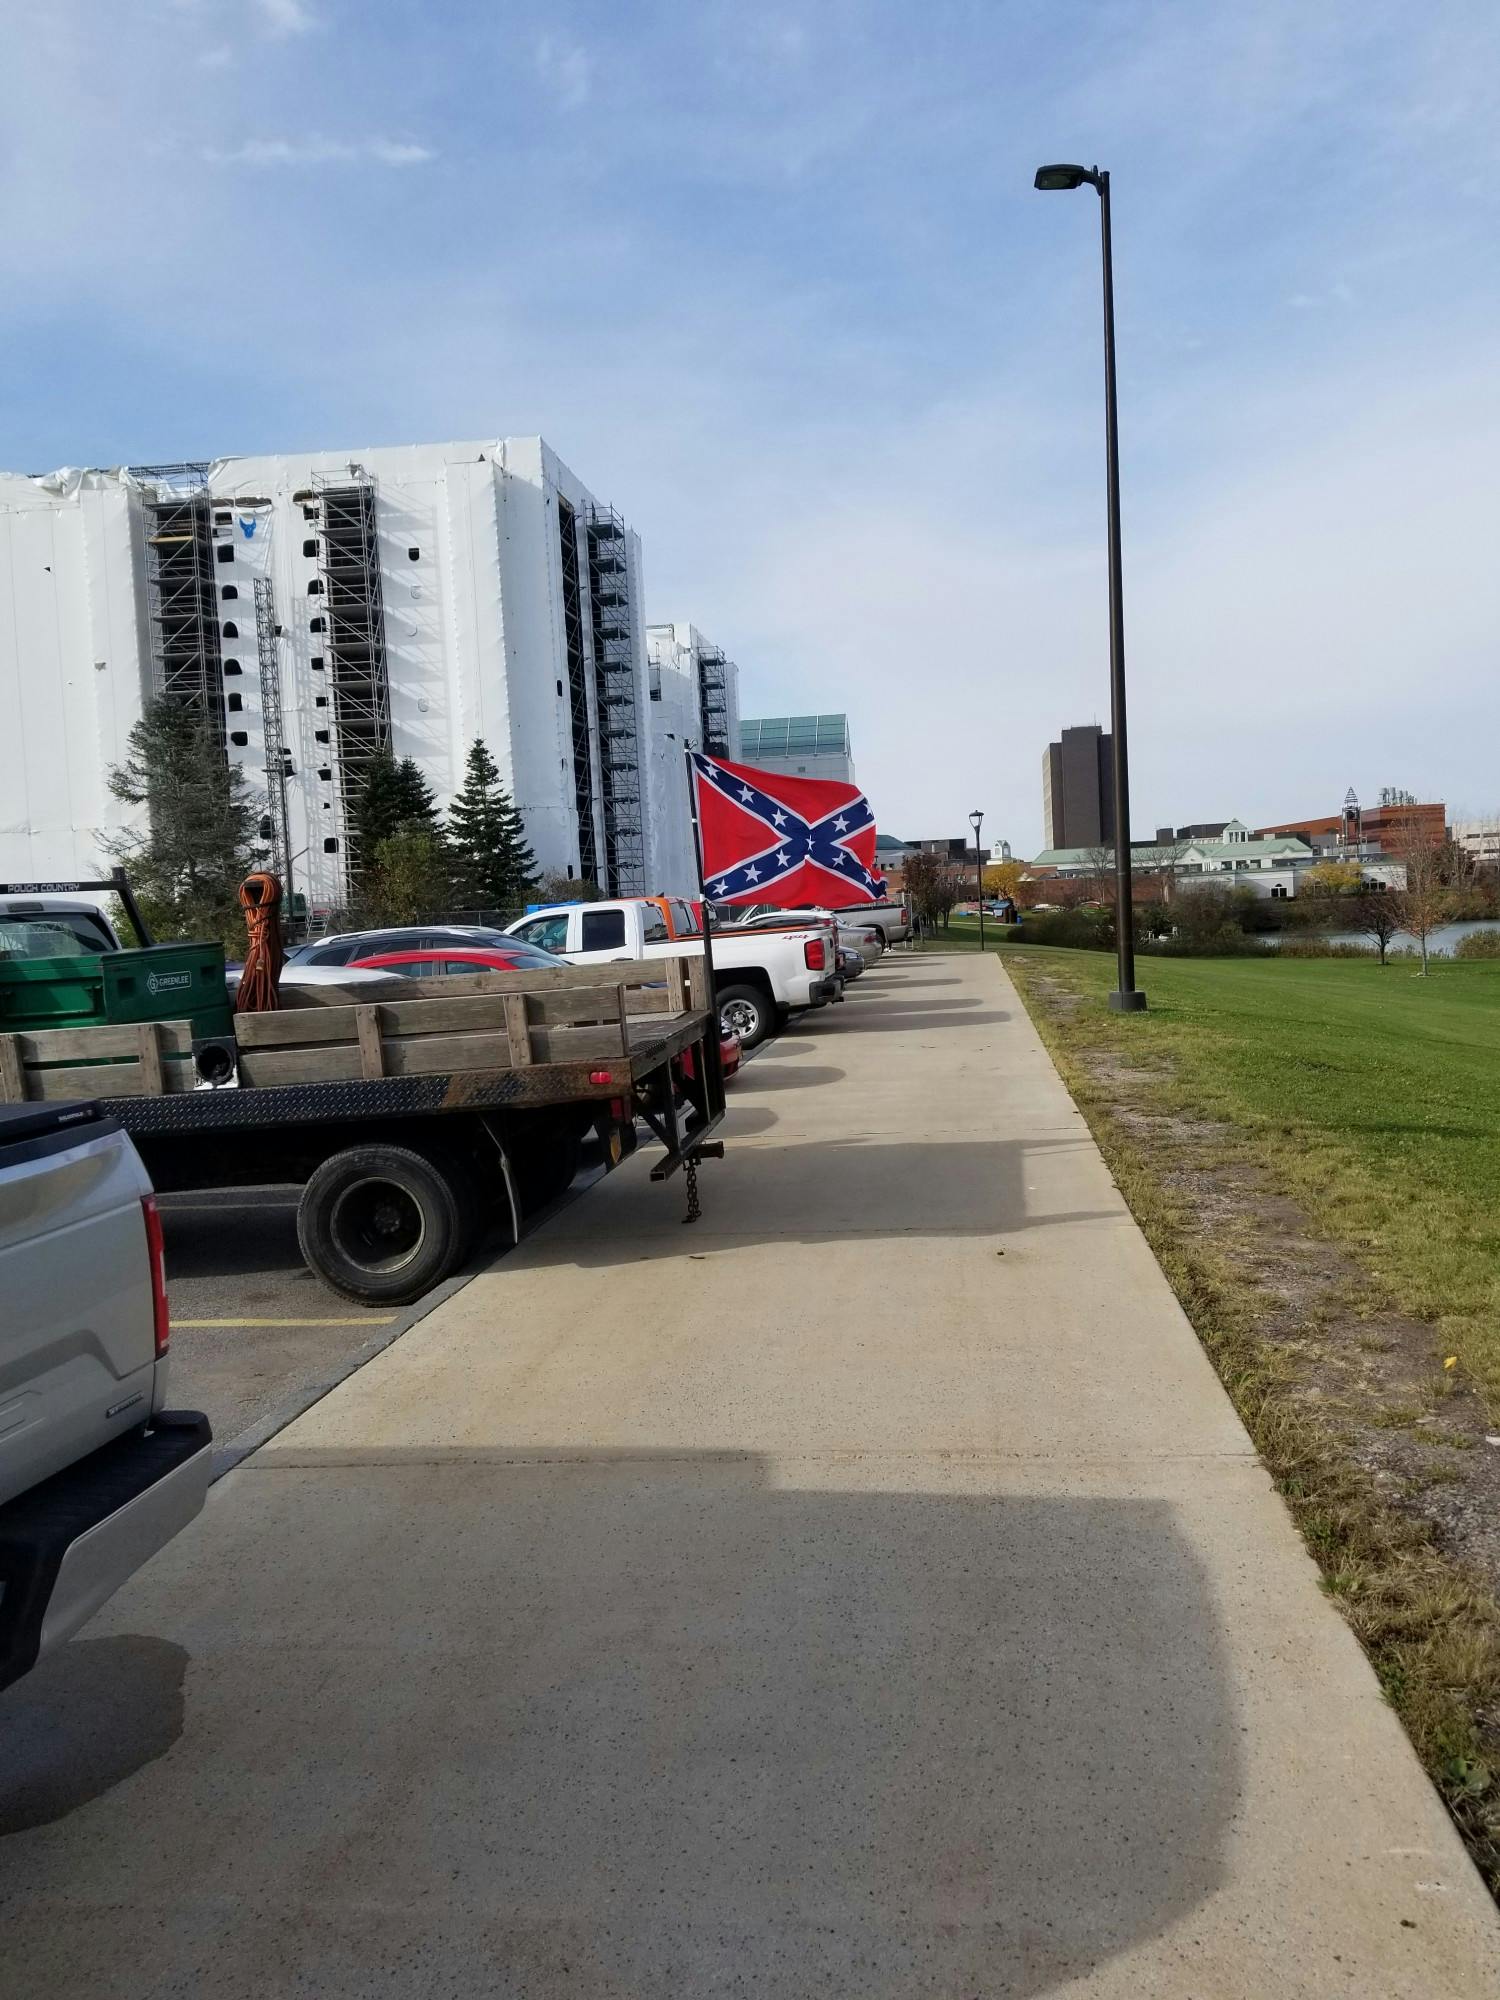 The Confederate Flag was displayed on the back of a Dodge truck on Monday. The truck is owned by a worker on the $12 million CFA construction project.